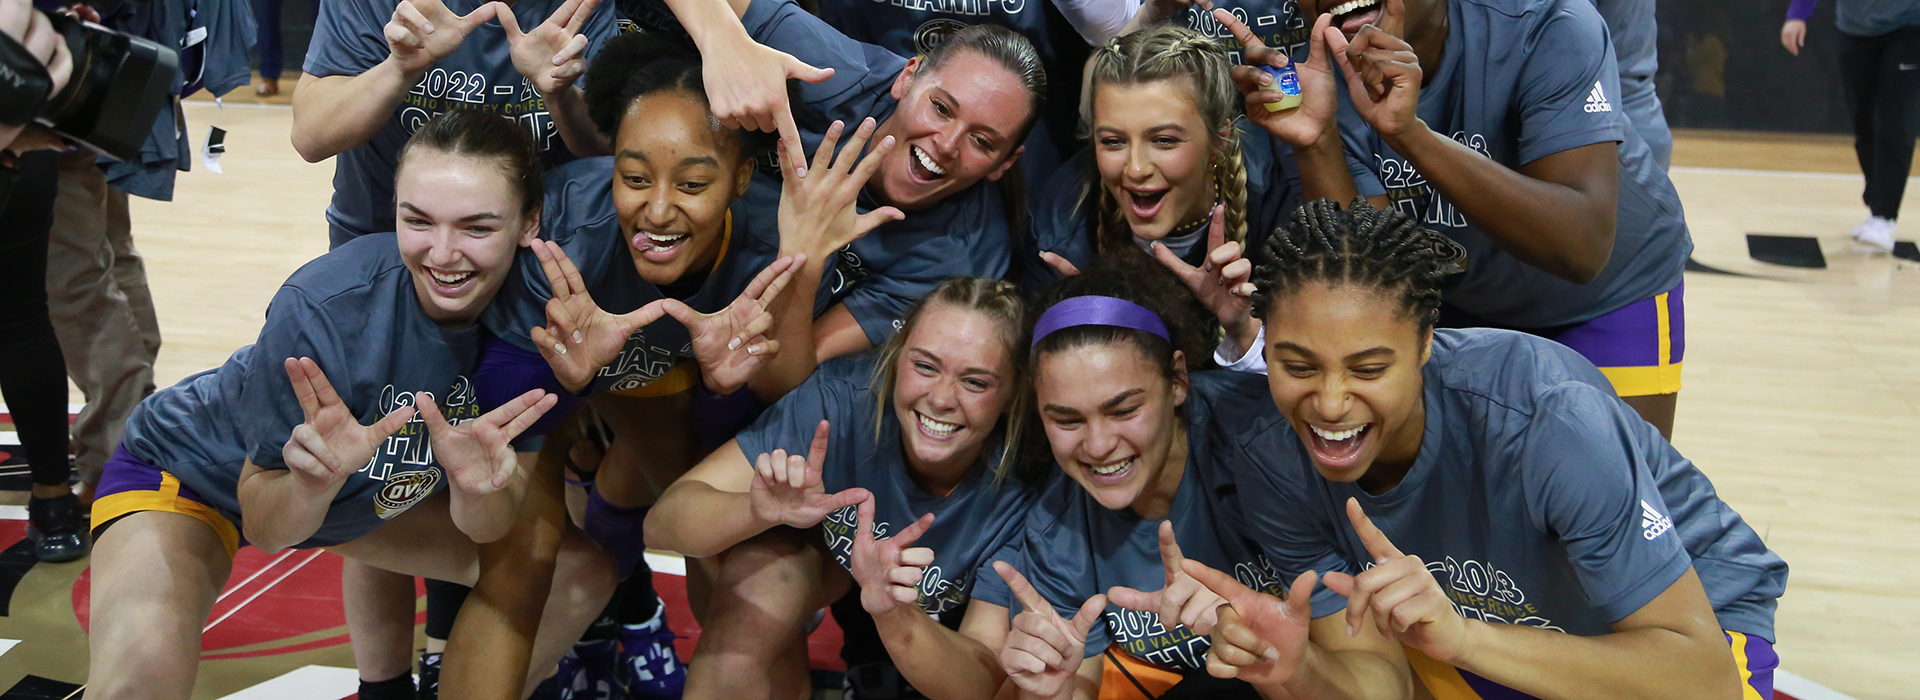 Tech women's basketball to host NCAA selection show party Sunday at Midtown Social